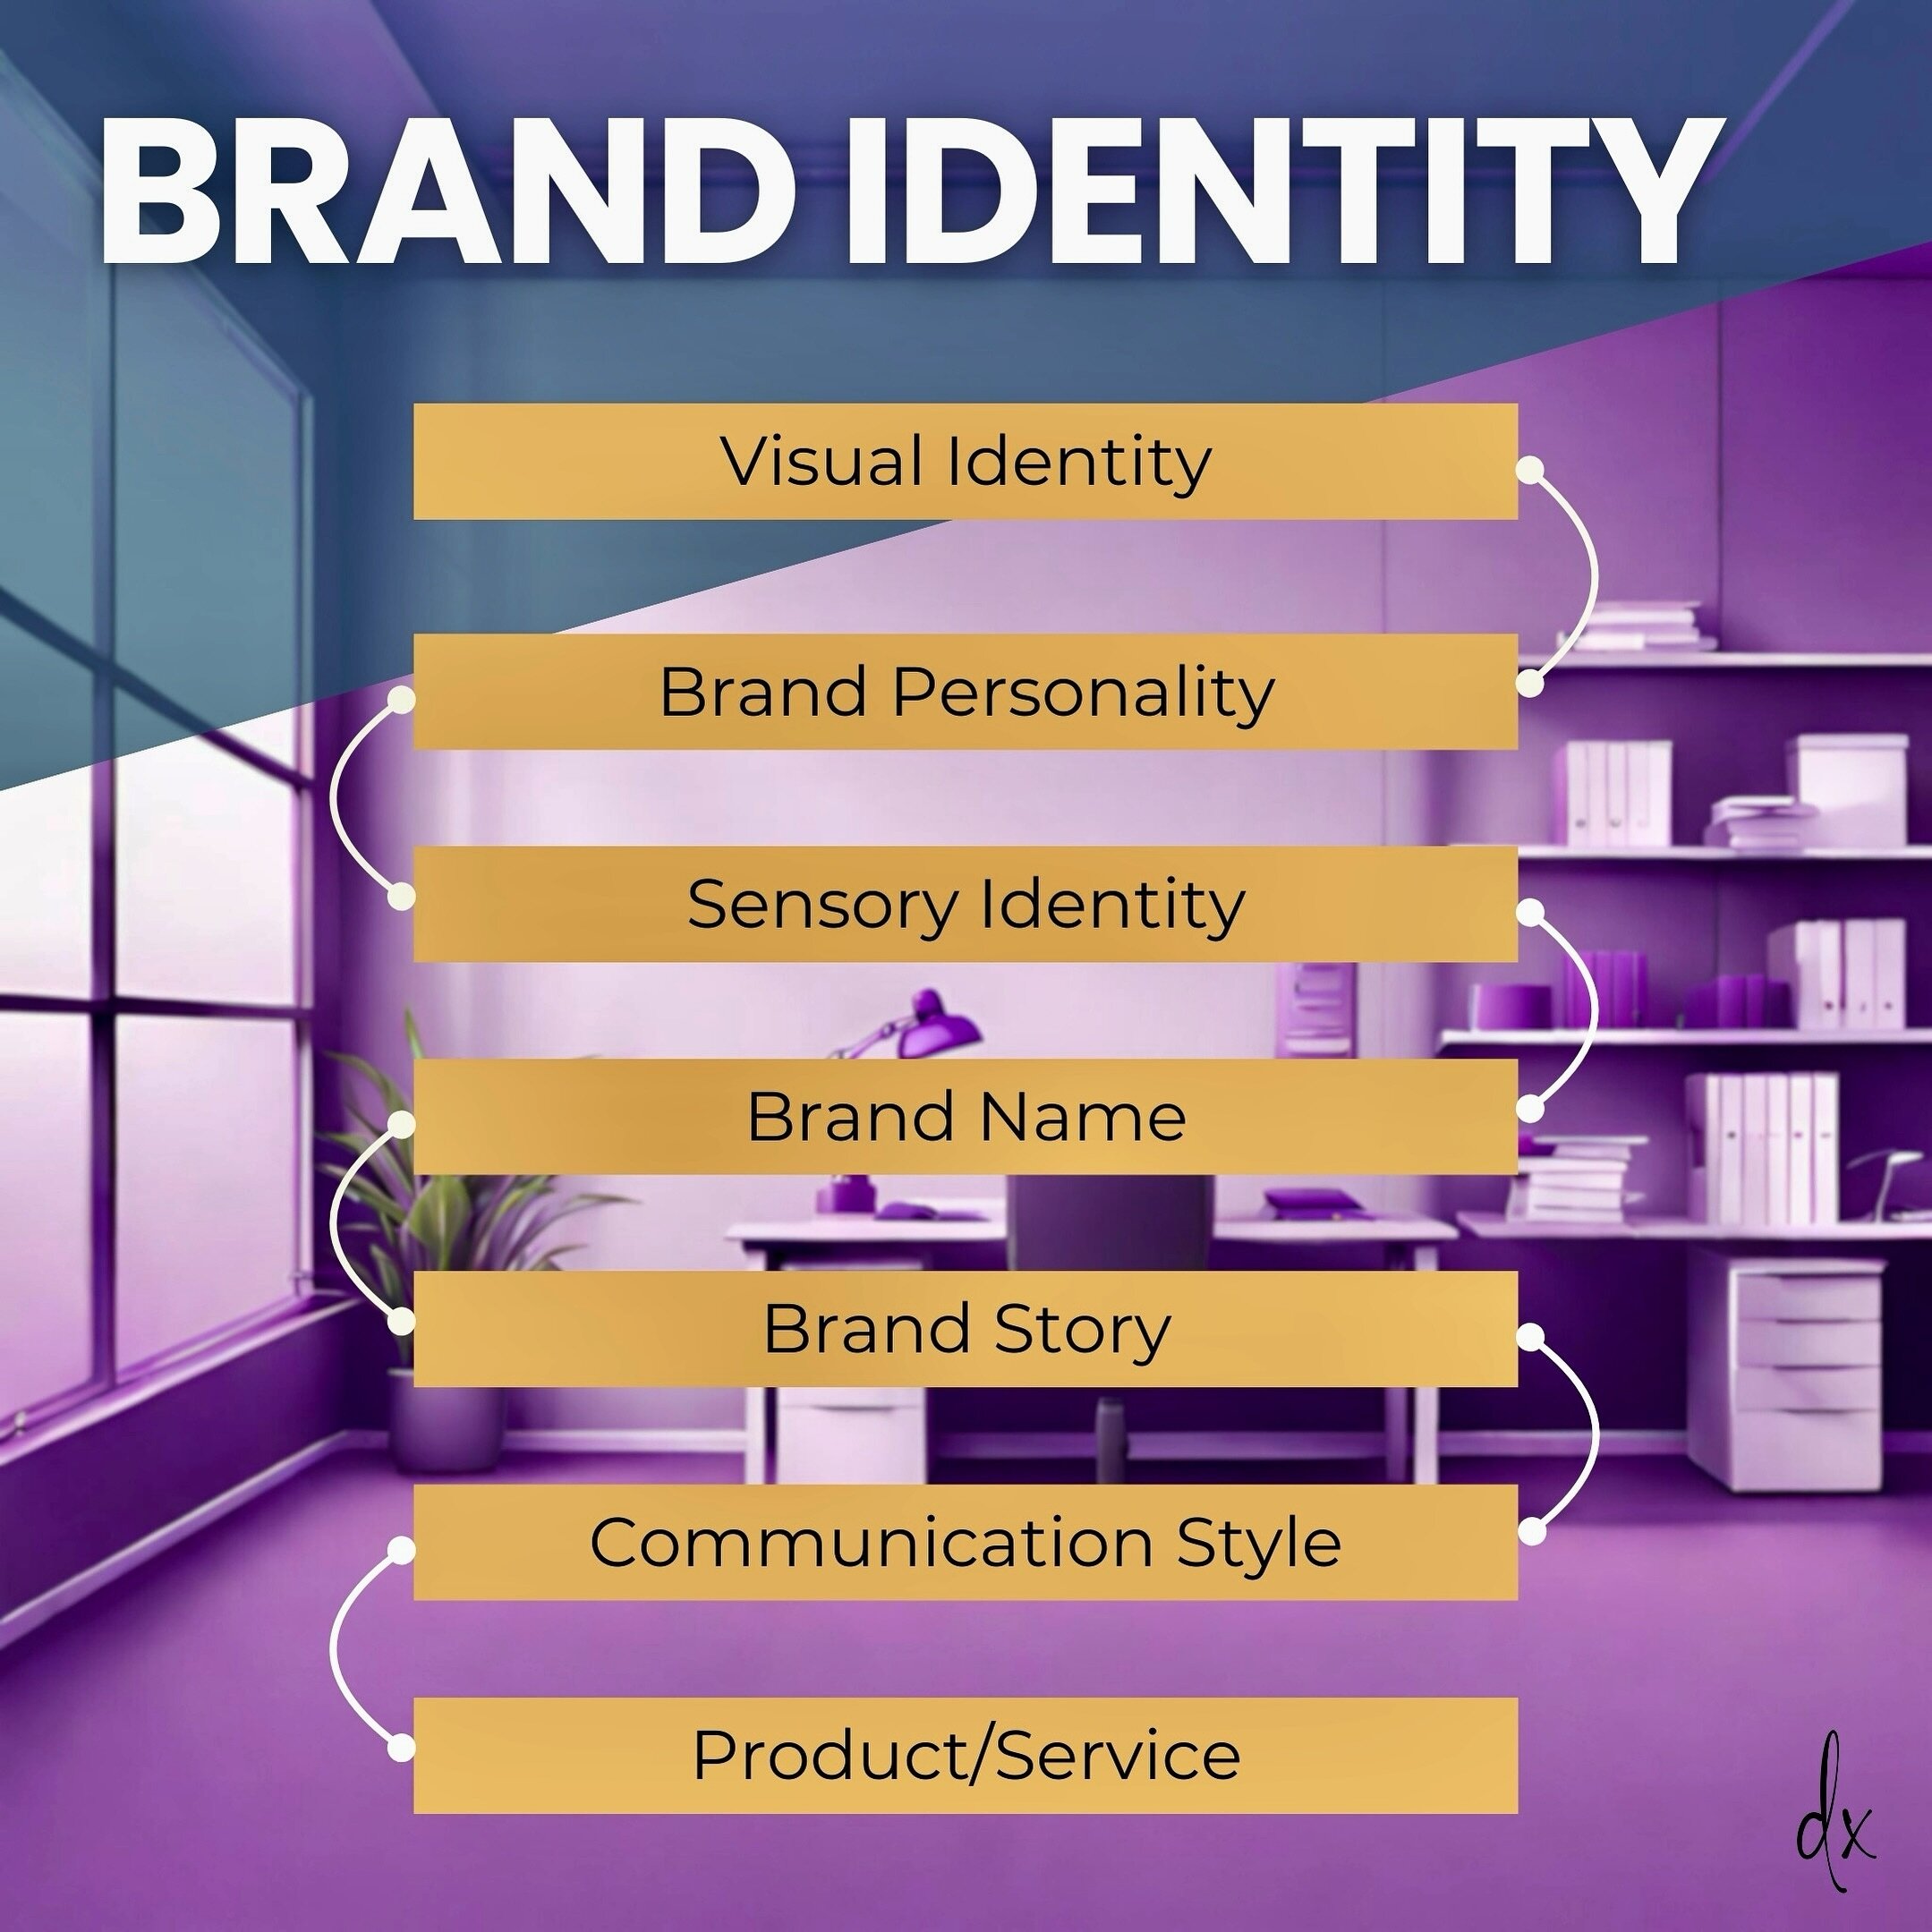 Let's talk about 'Brand Identity' ✅

Brand identity encompasses the visual, verbal, and experiential elements that distinguish a brand and shape its perception in the minds of the consumers. Consistent, cohesive and effective branding fosters recogni